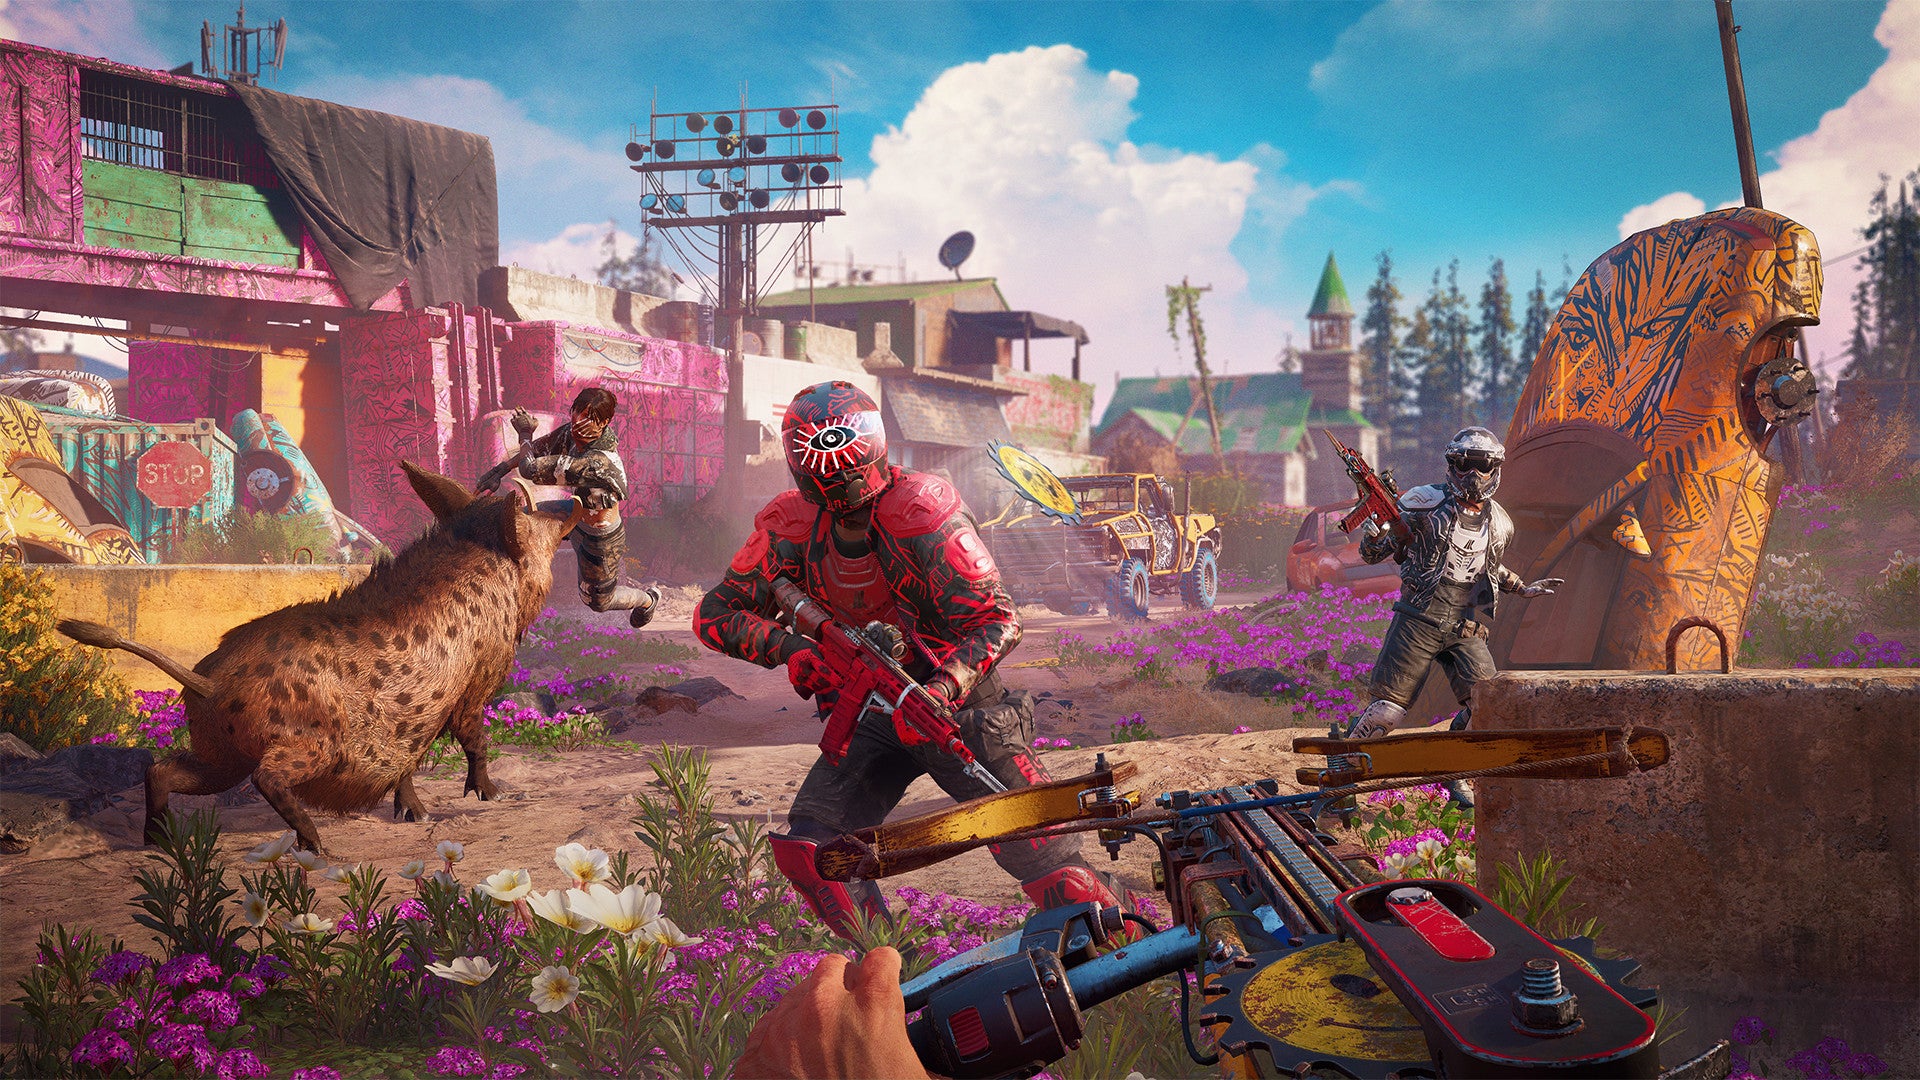 The protagonist of Far Cry New Dawn firing their buzz saw blade at a motorcycle gear-wearing enemy, while their boar friend spears someone in the background.